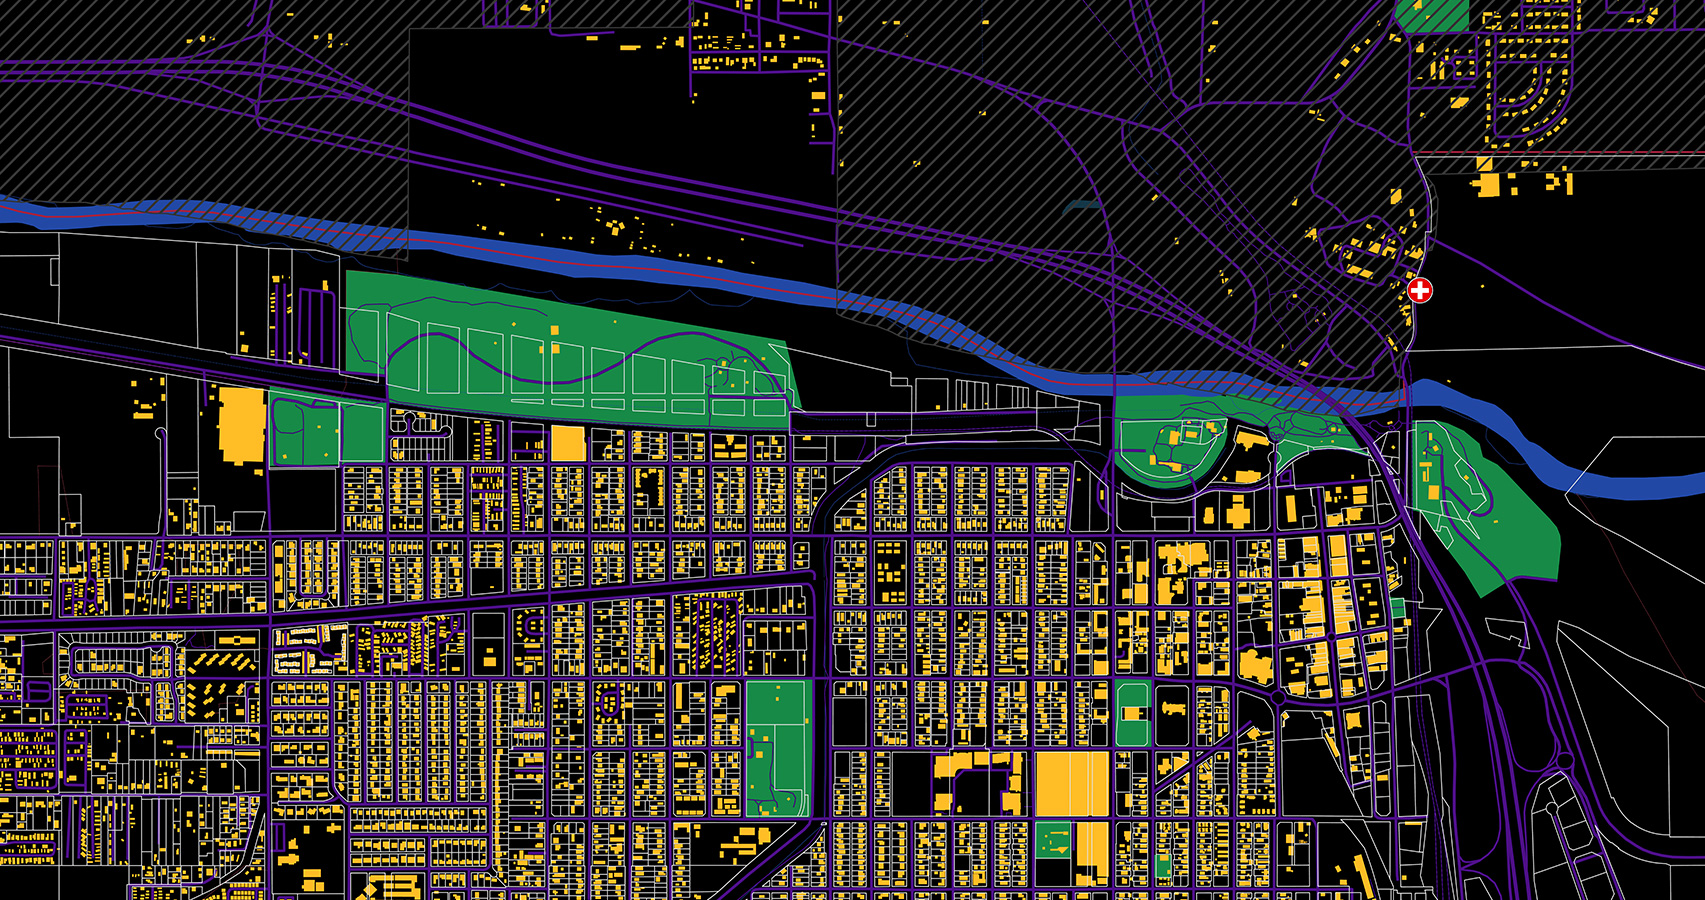 A detailed city map with roads in vivid purple and structures in bright yellow and green on a black background with a blue river flowing through the center 